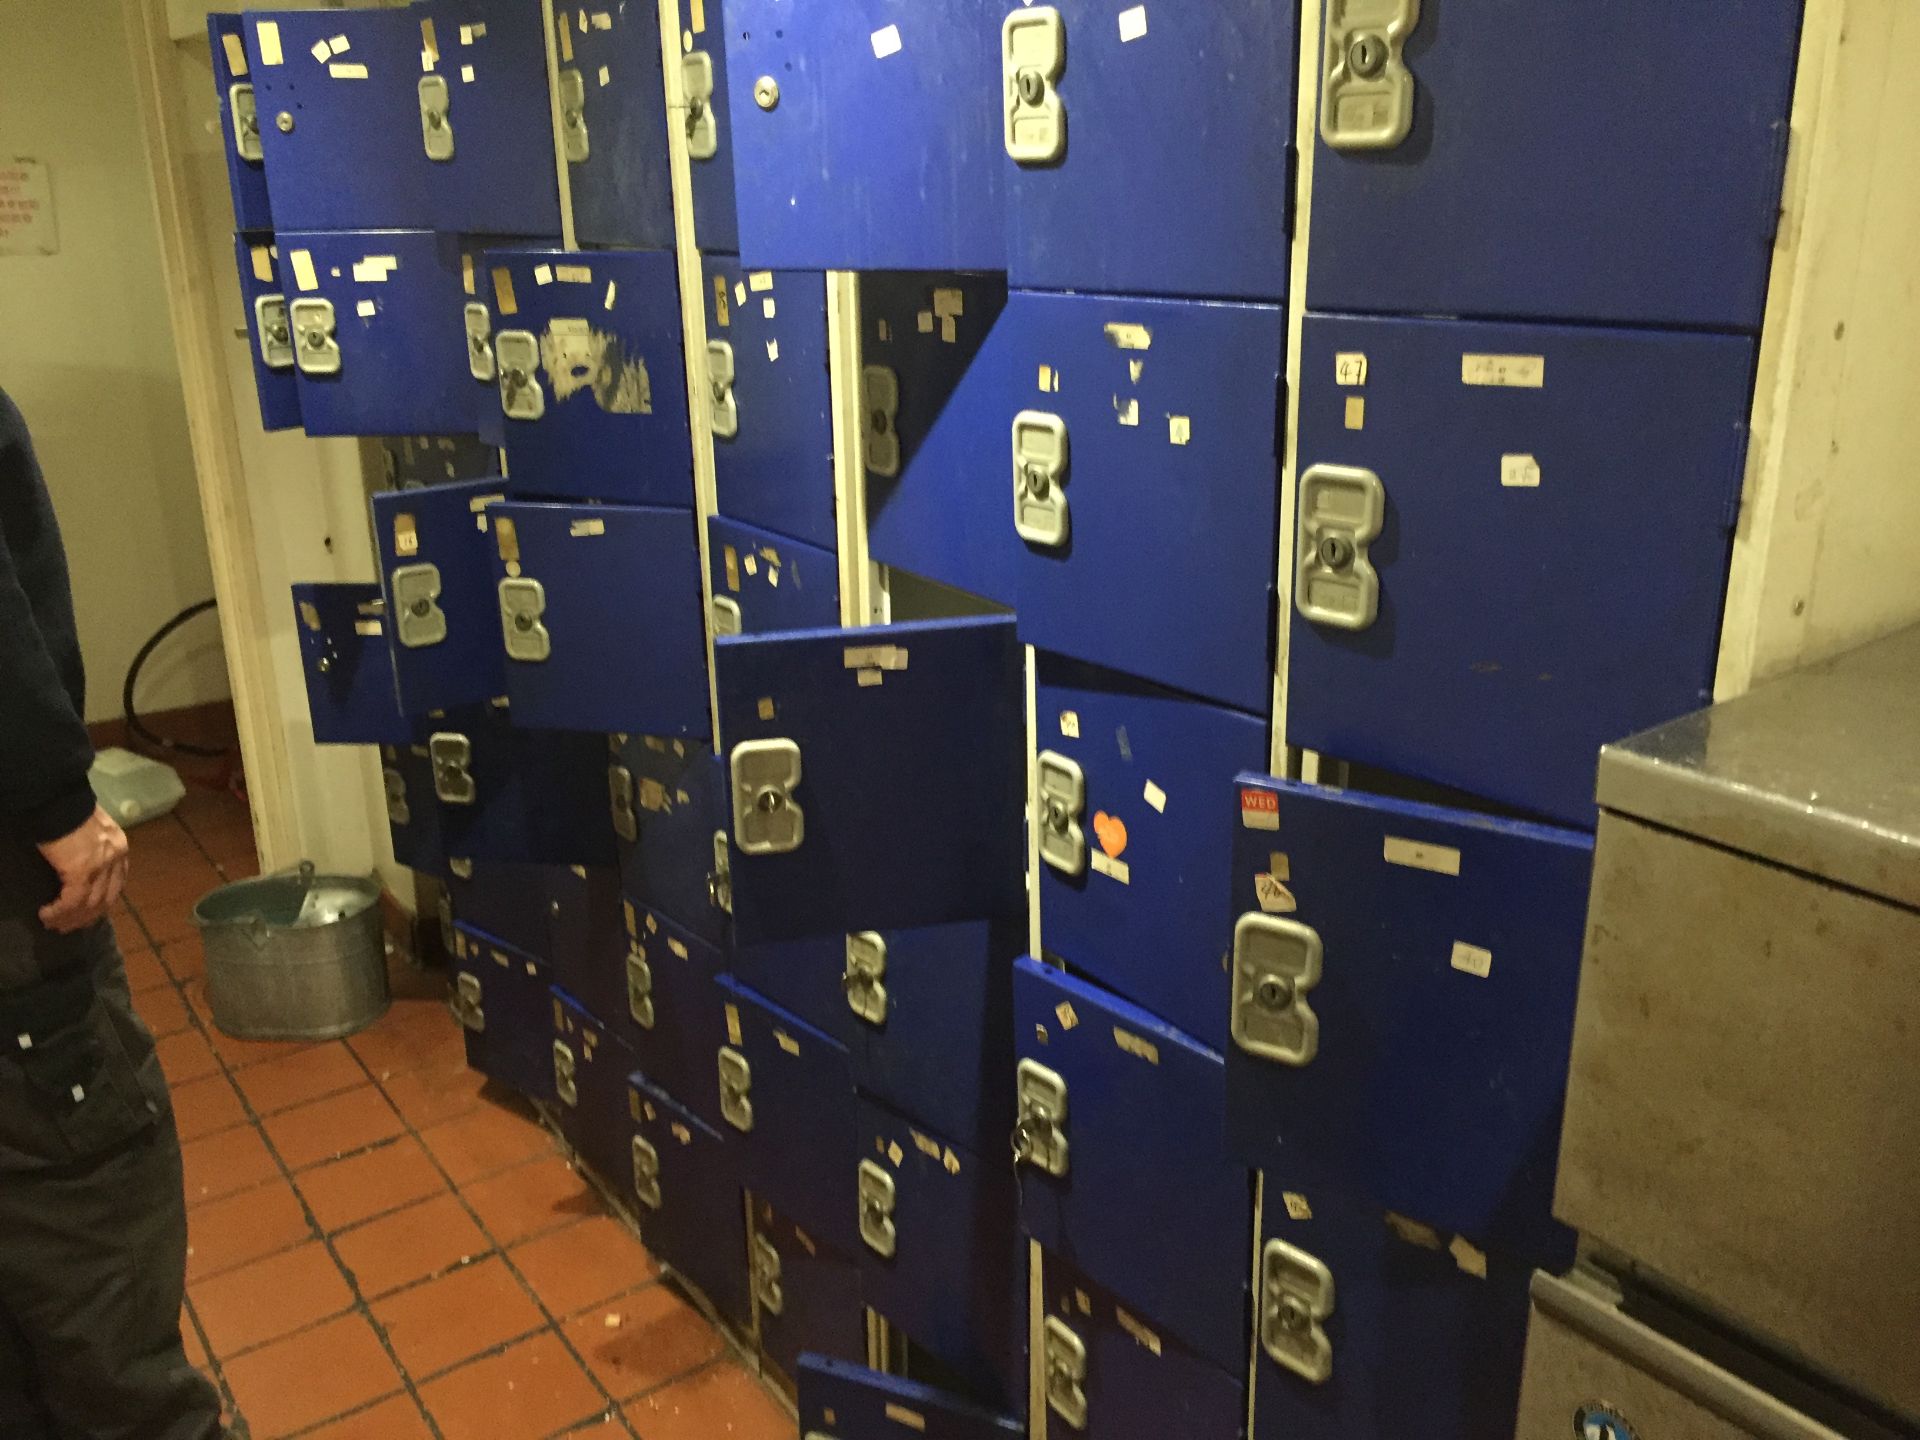 Job Lot of 8 x Storage Lockers each with 6 doors per unit, please note most have keys missing - - Image 2 of 3